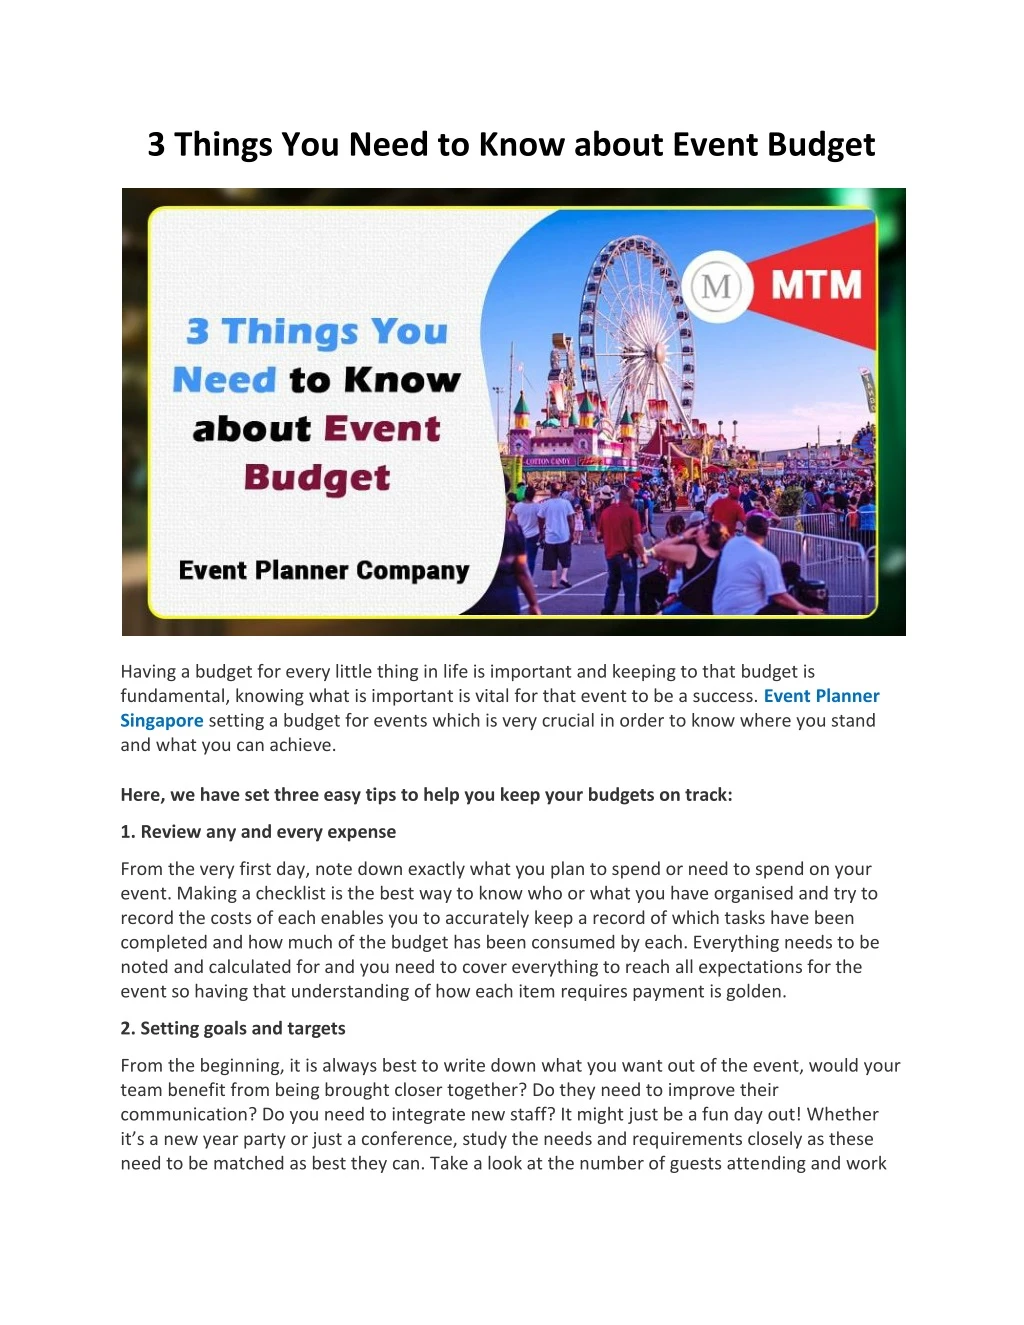 3 things you need to know about event budget